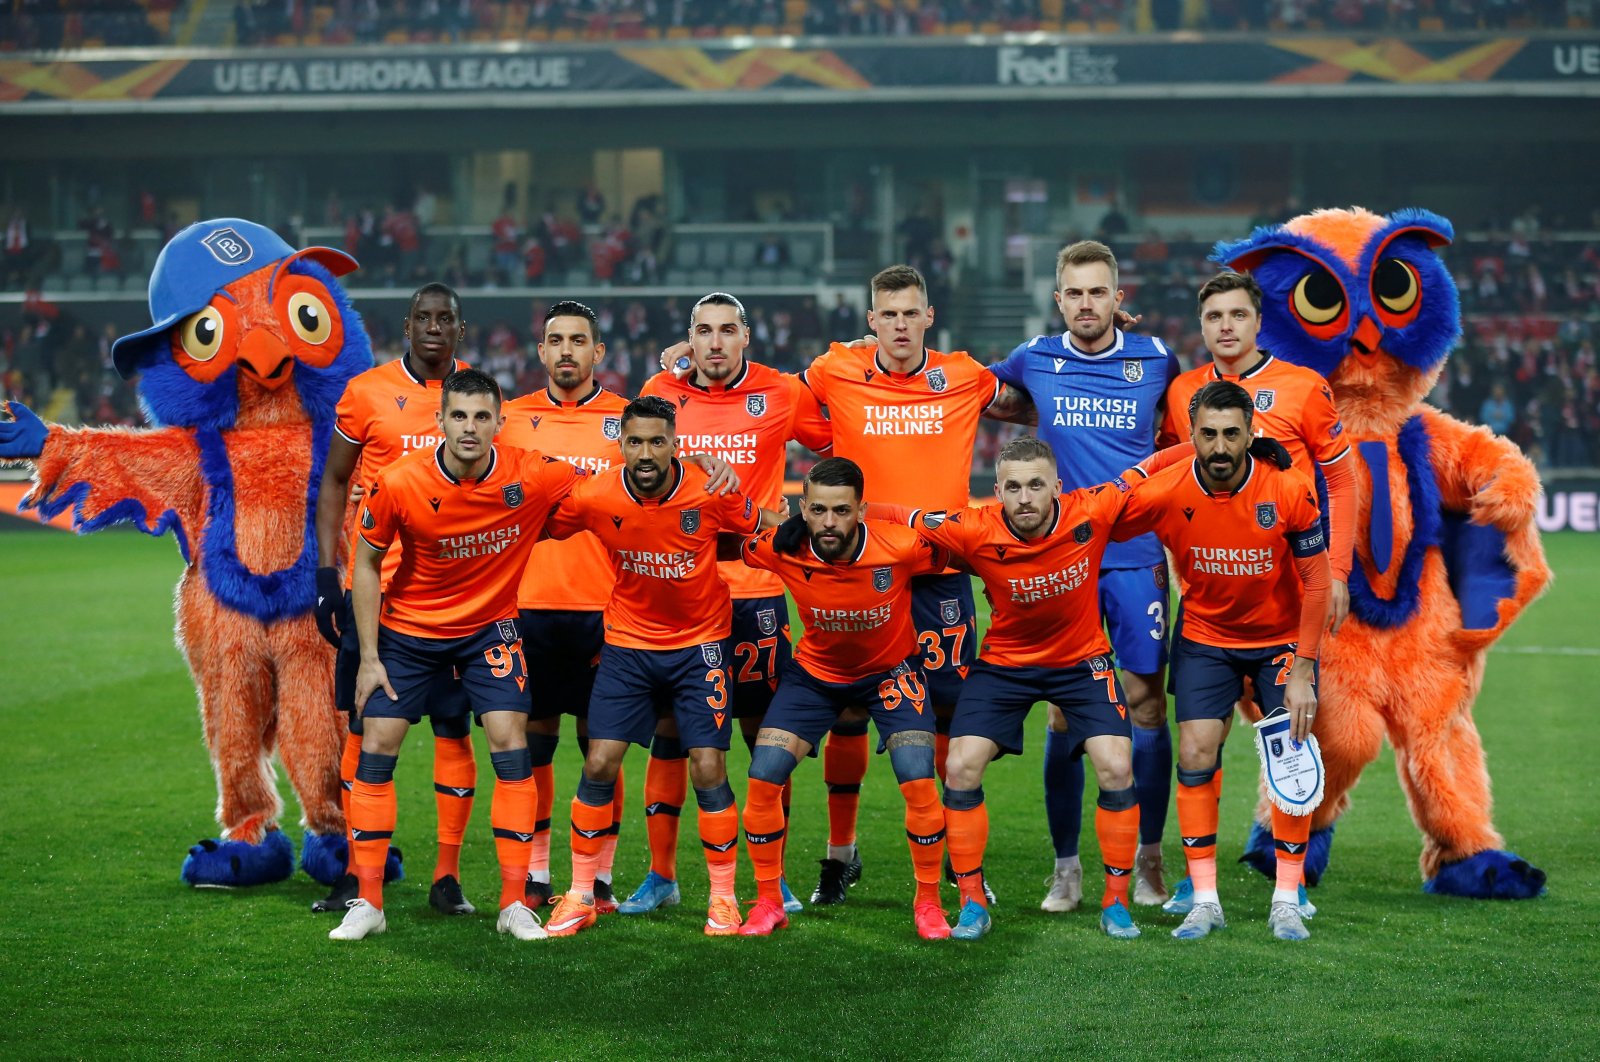 Istanbul Başakşehir players pose for a team group photo before the match against FC Copenhagen in Istanbul, Turkey, March 12, 2020 (Reuters Photo)